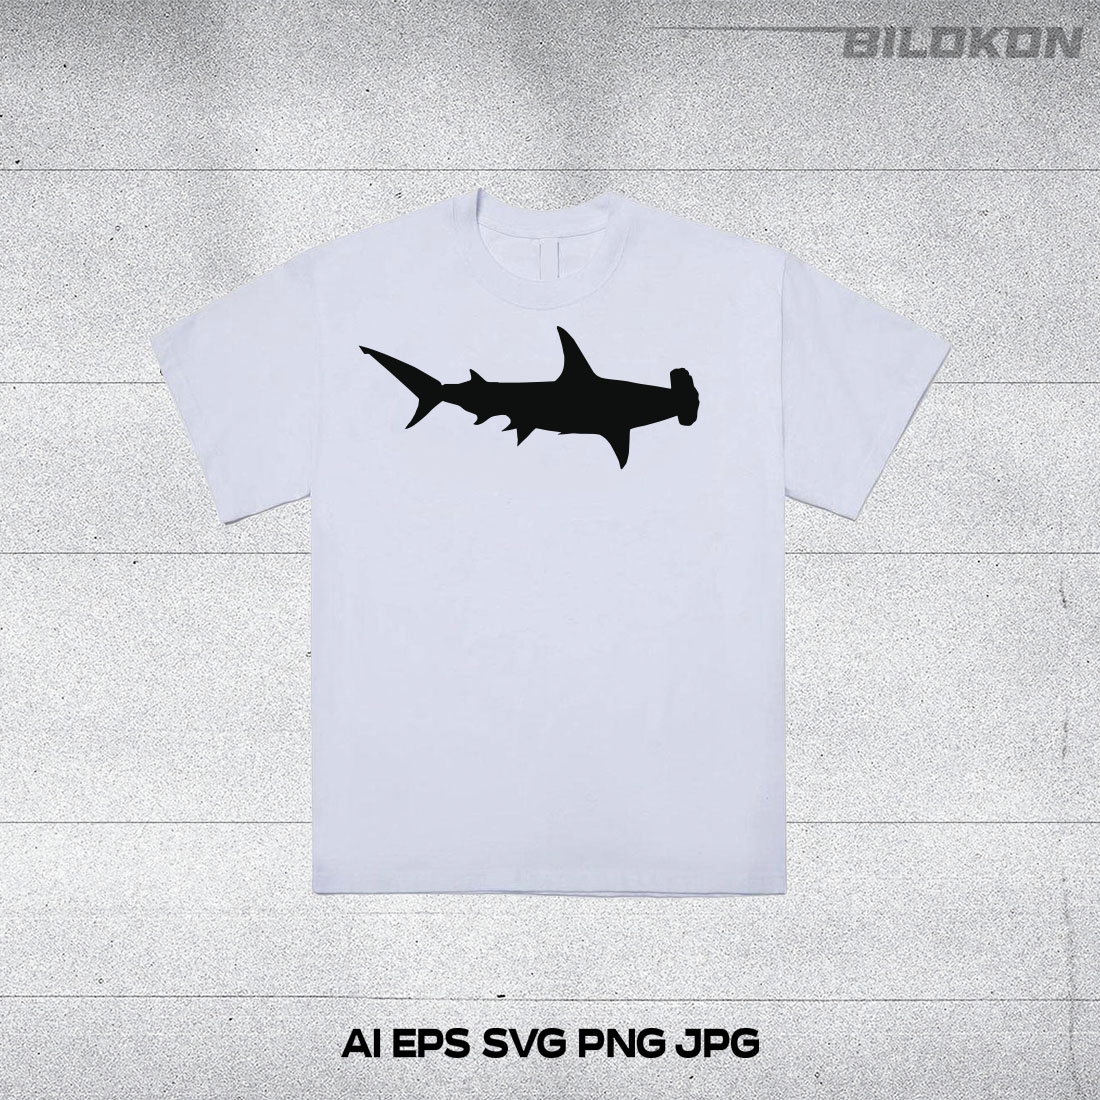 White t - shirt with a black shark on it.